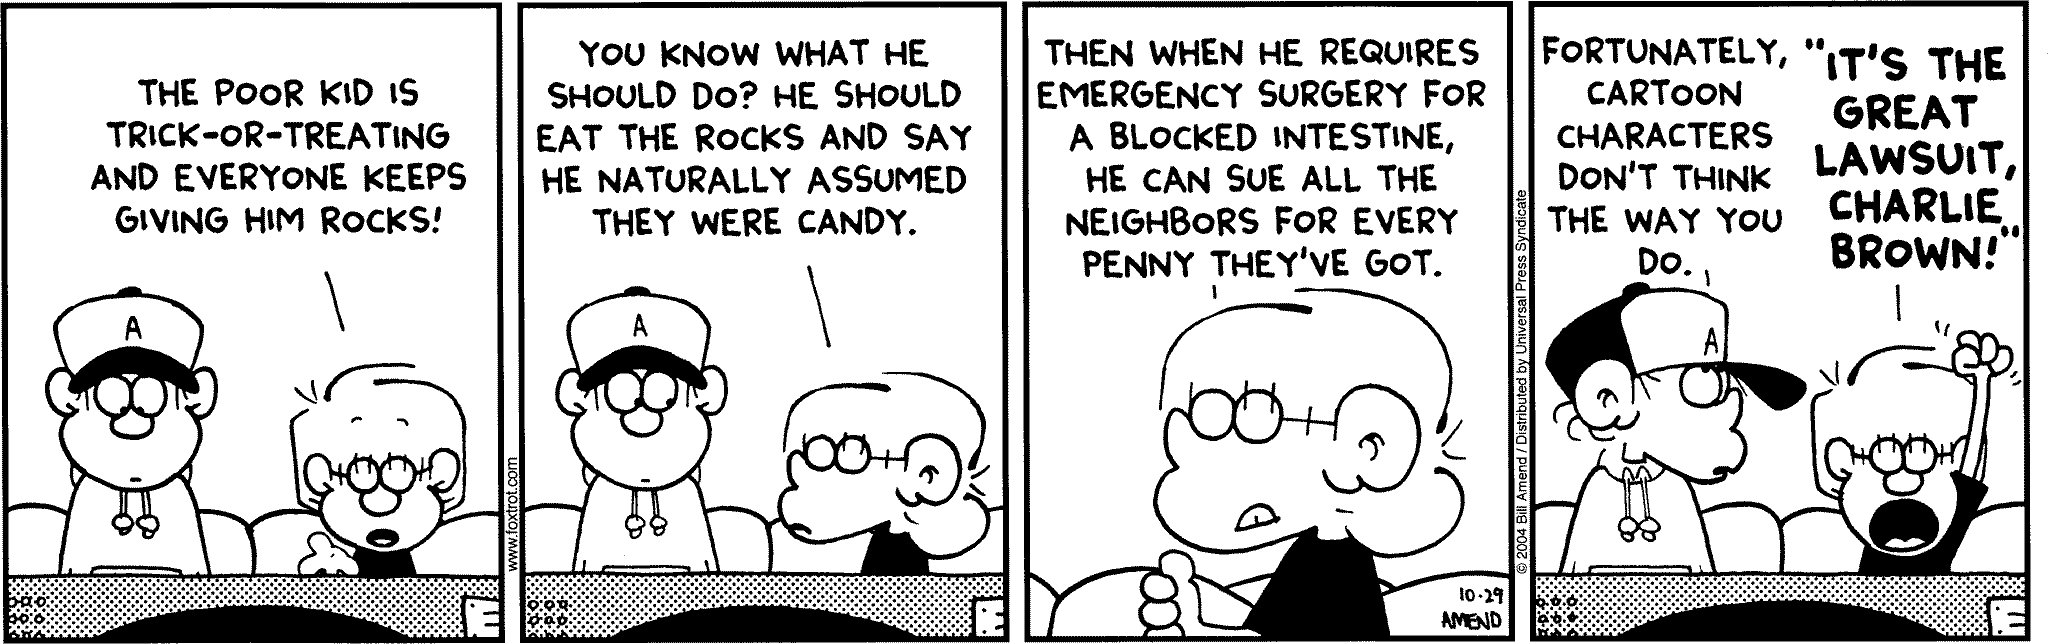 Halloween Comics - FoxTrot comic strip by Bill Amend - Published October 29, 2004 - Jason: The poor kid is trick-or-treating and everyone keeps giving him rocks! You know what he should do? He should eat the rocks and say he naturally assumed they were candy. Then when he requires emergency surgery for a blocked intestine, he can sue all the neighbors for every penny they've got. Peter: Fortuantely, cartoon characters don't think the way you do. Jason: "It's the great lawsuit, Charlie Brown!"